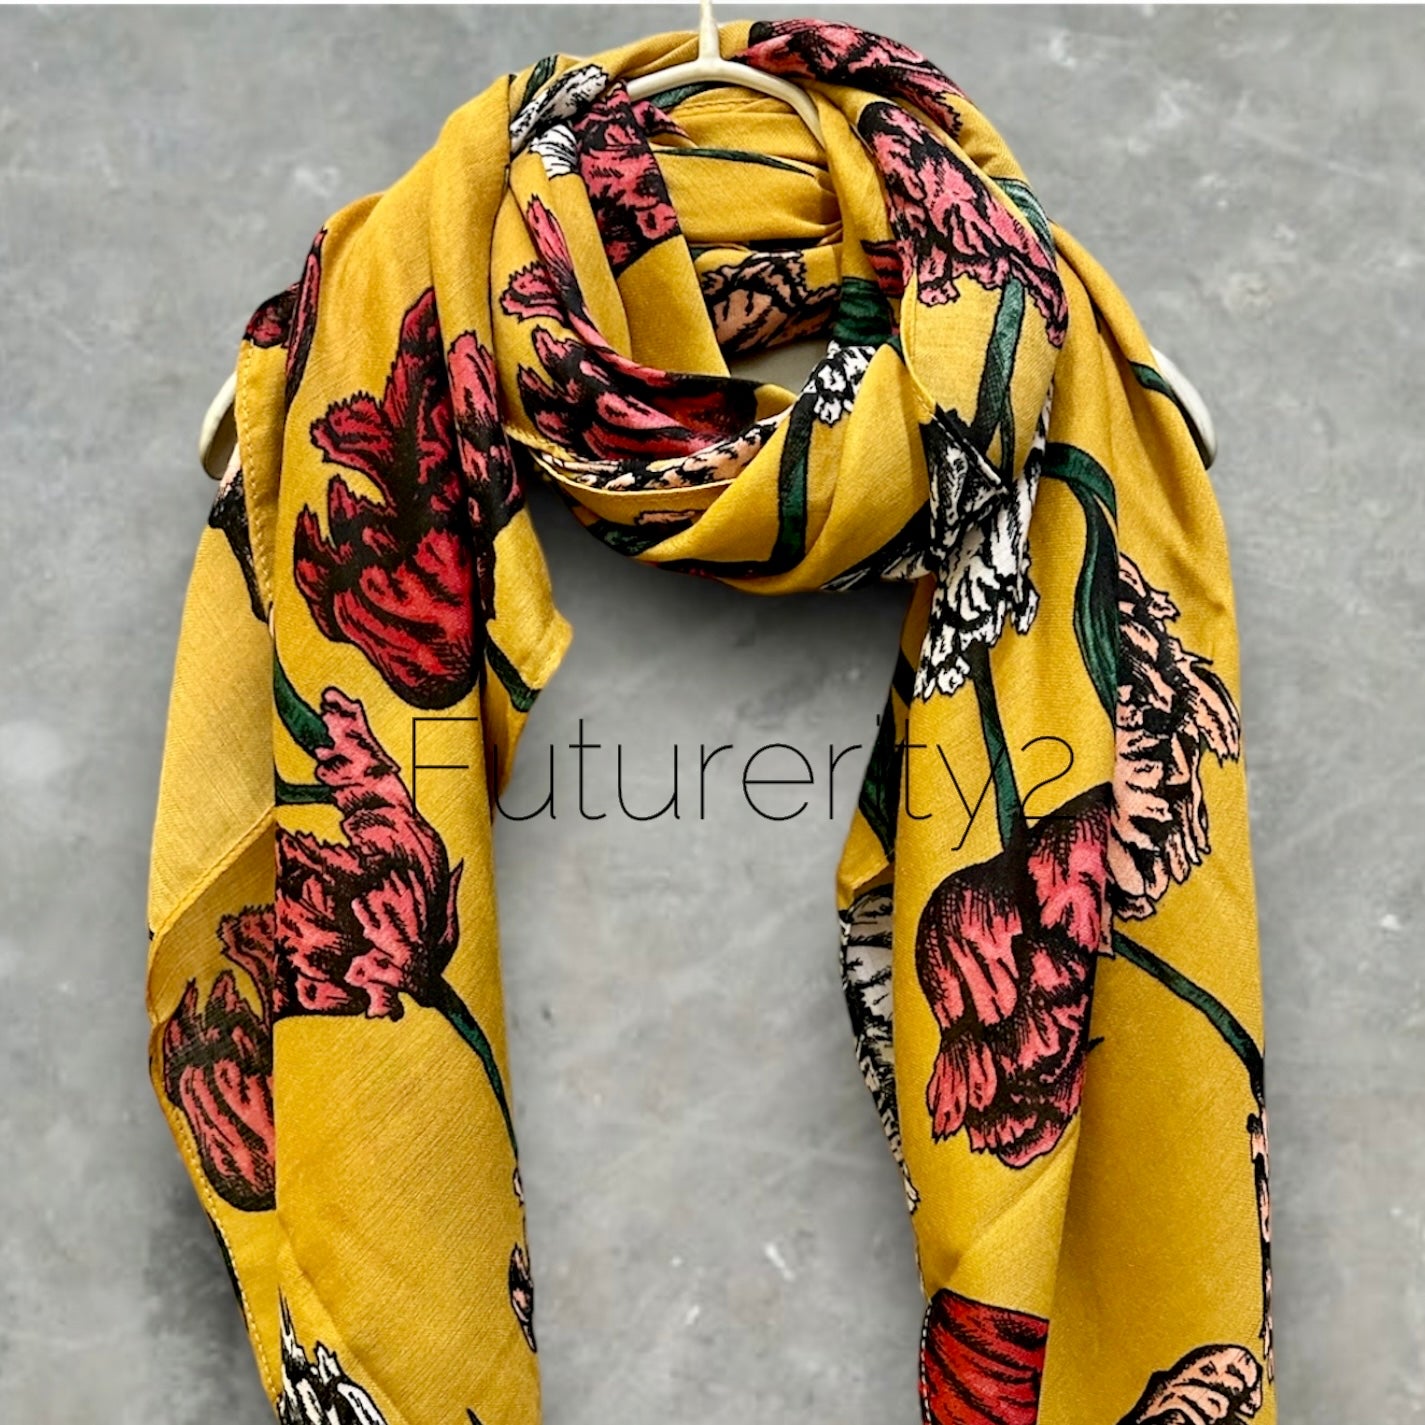 Mustard Yellow Scarf with Eco-Friendly Sketched Parrot Tulips Flower Design – A Sustainable Gift for Mom and Her, Ideal for Birthday and Christmas Celebrations